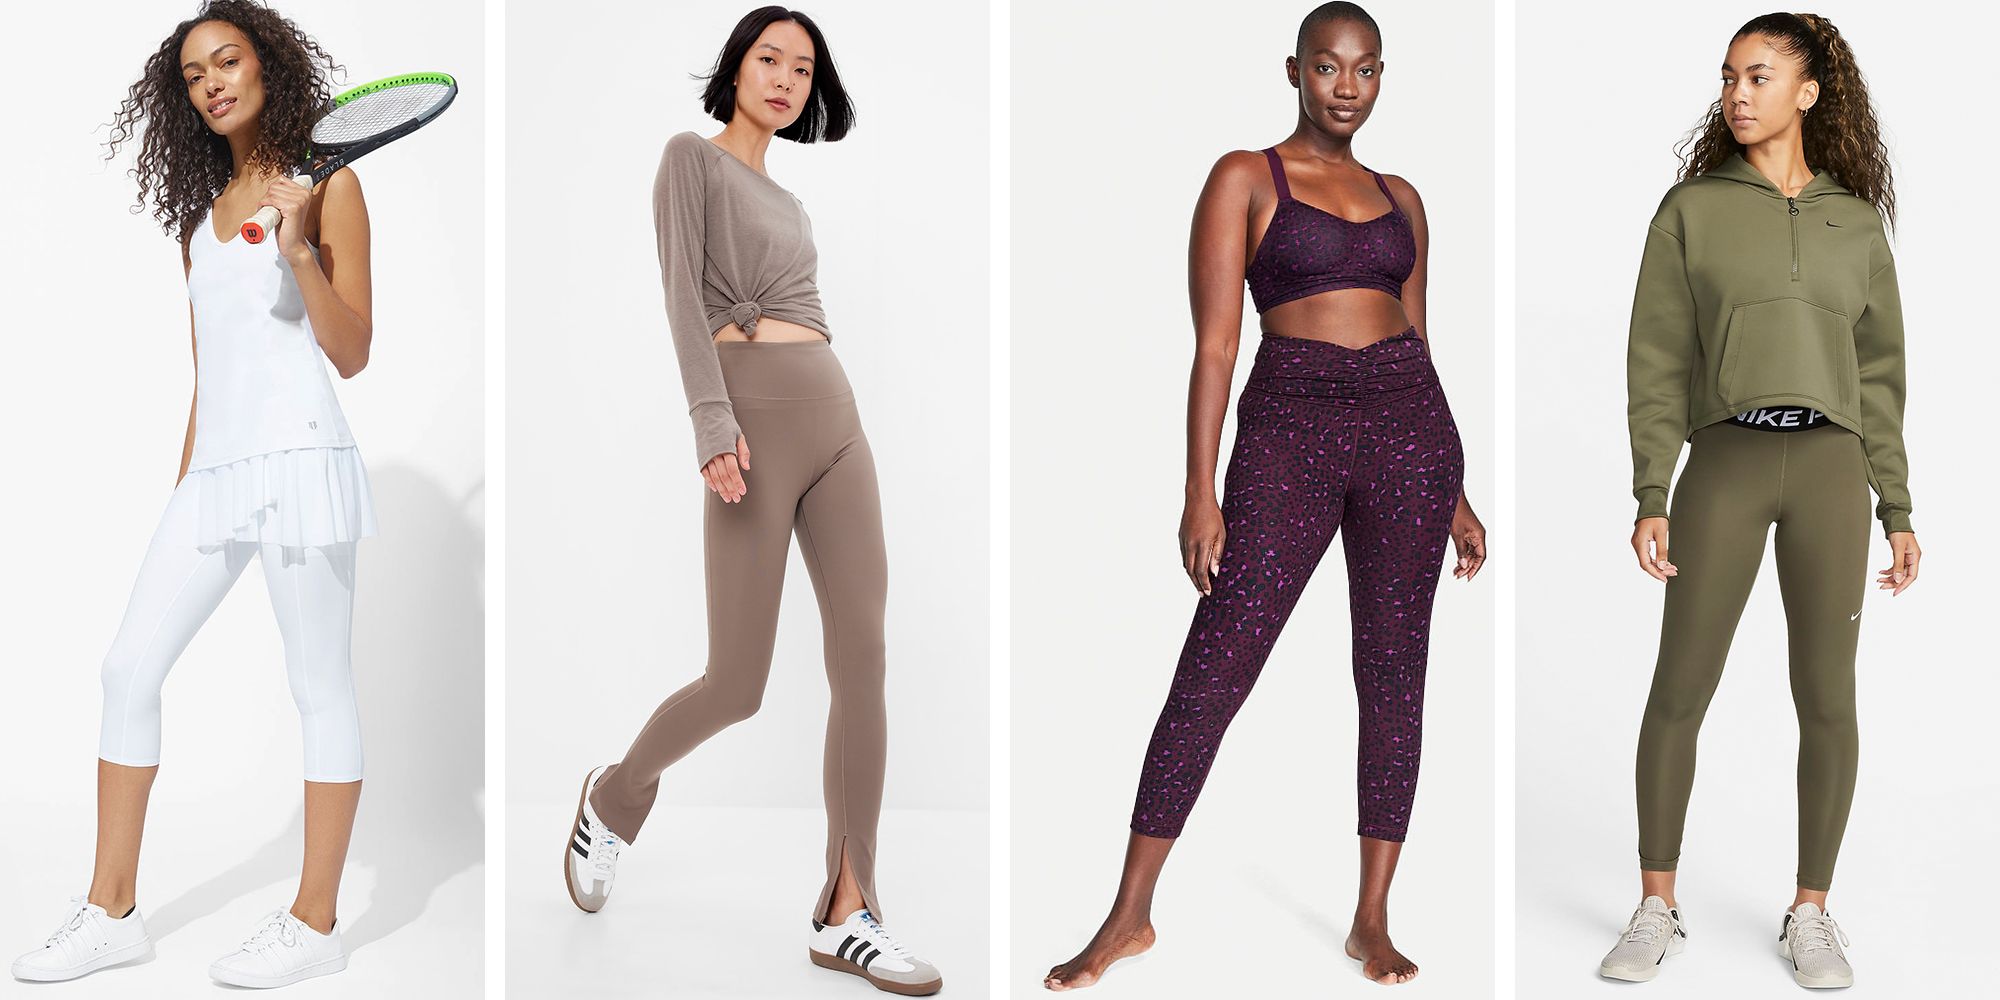 The 9 Best Yoga Pants You Should Consider Buying in 2022